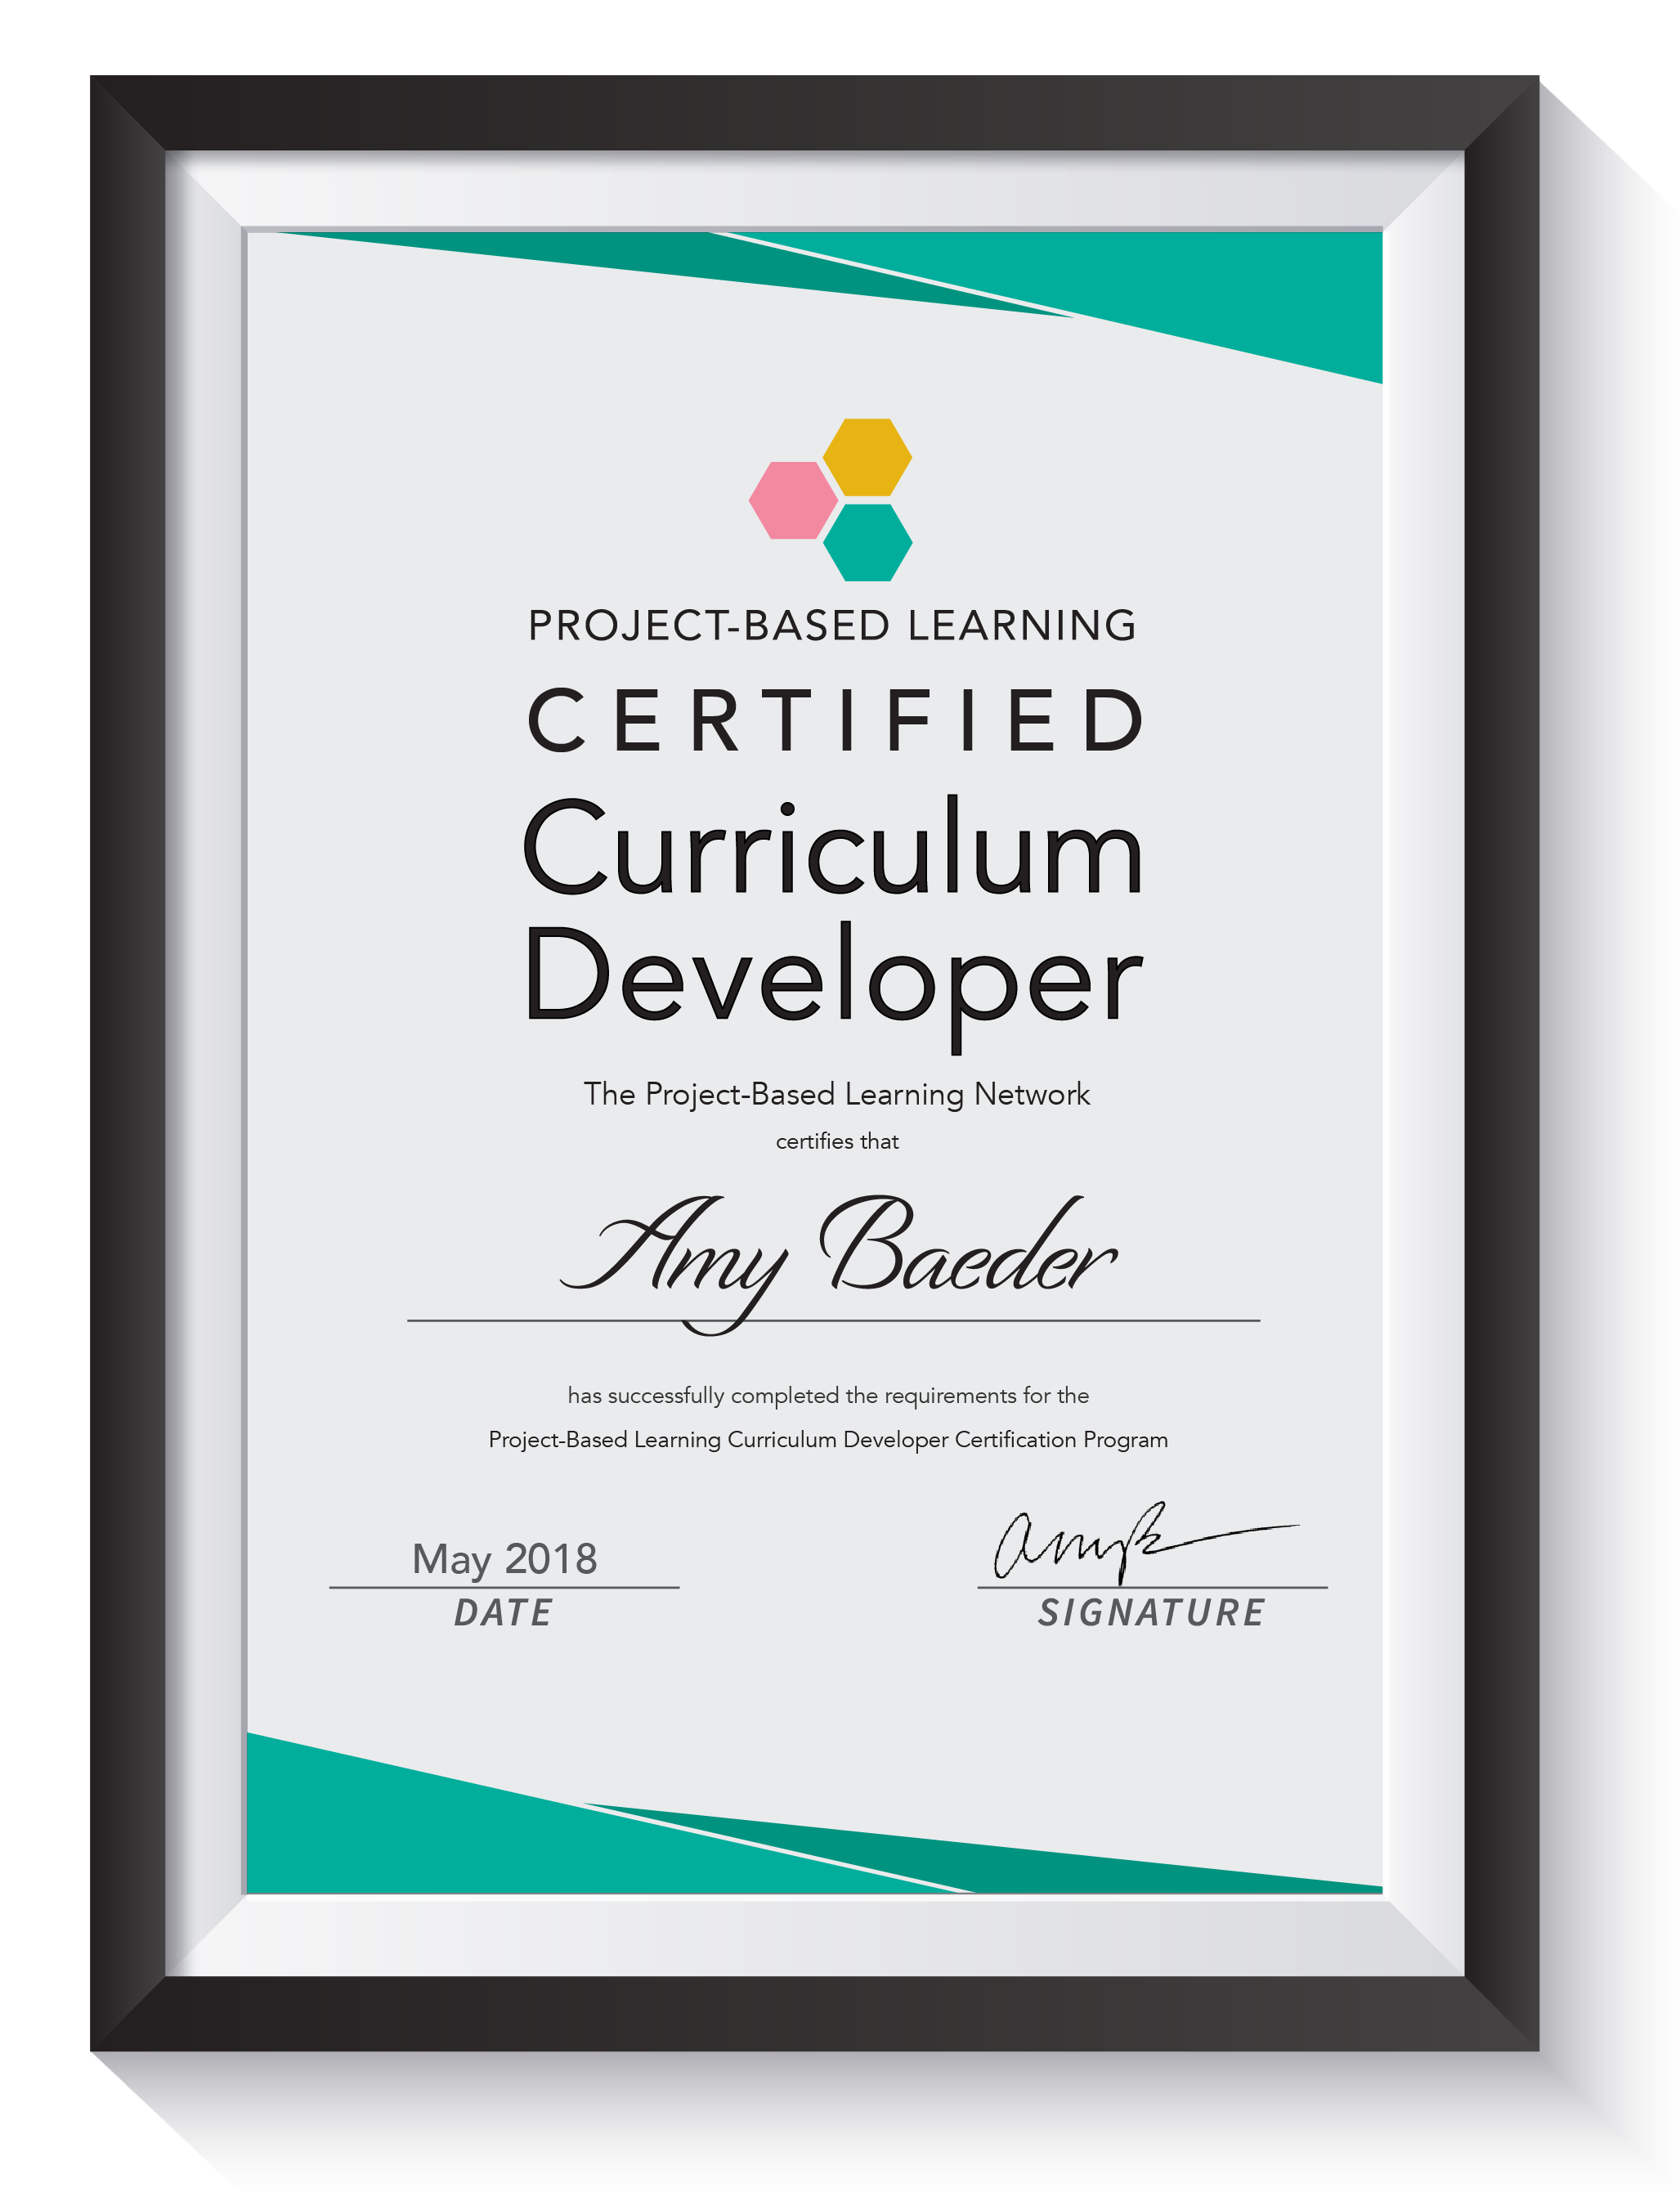 learning and earning development project certificate